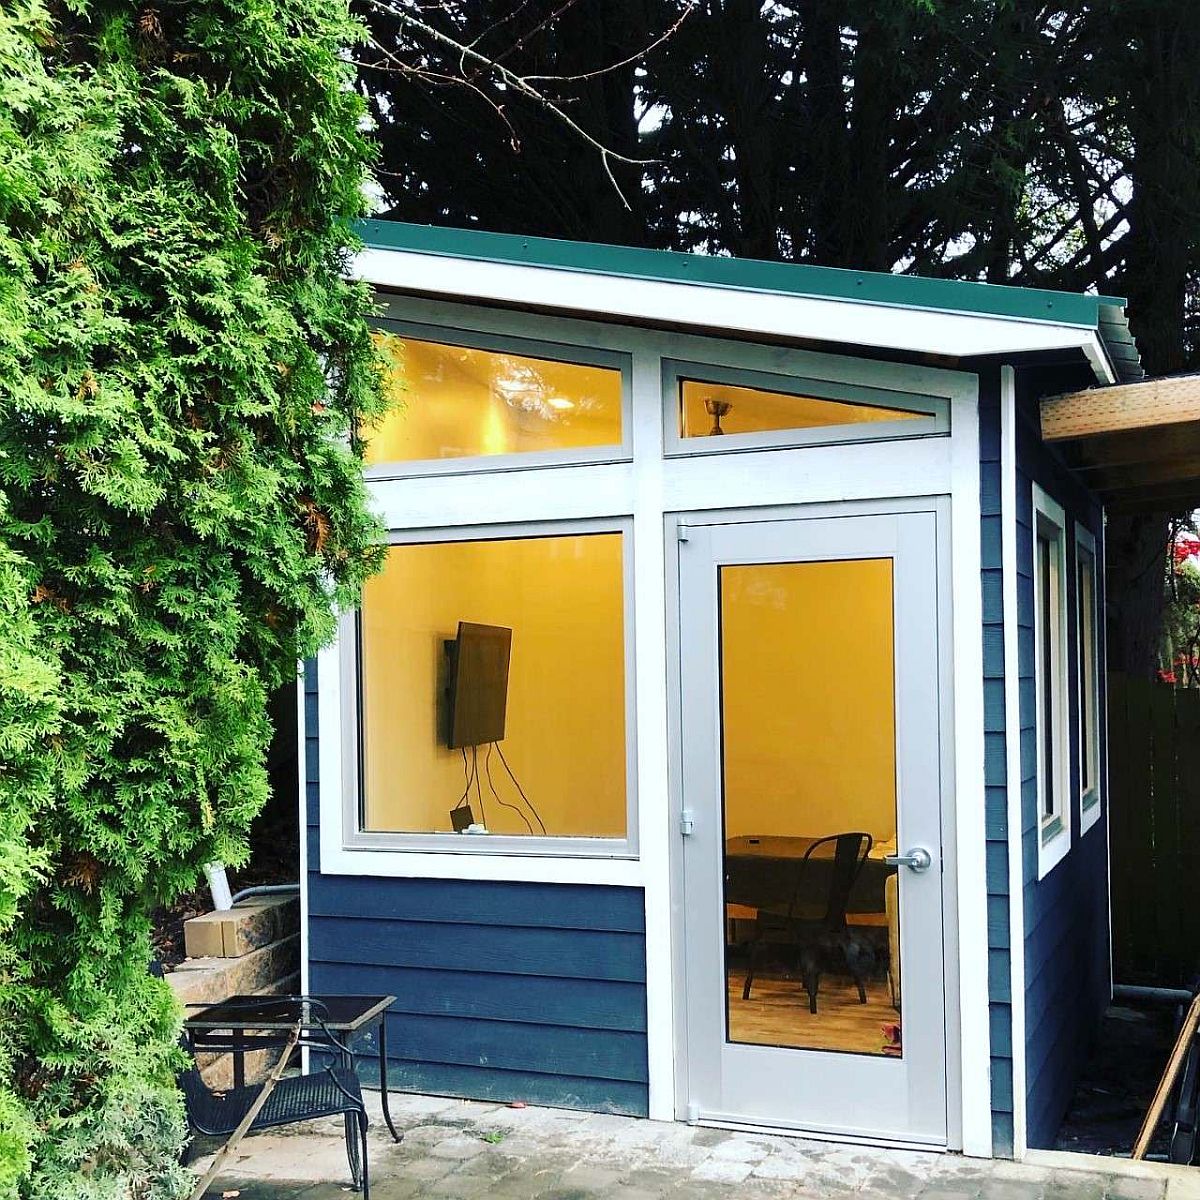 Tiny-home-office-in-the-backyard-with-large-glass-windows-that-connect-it-with-the-world-outside-77004